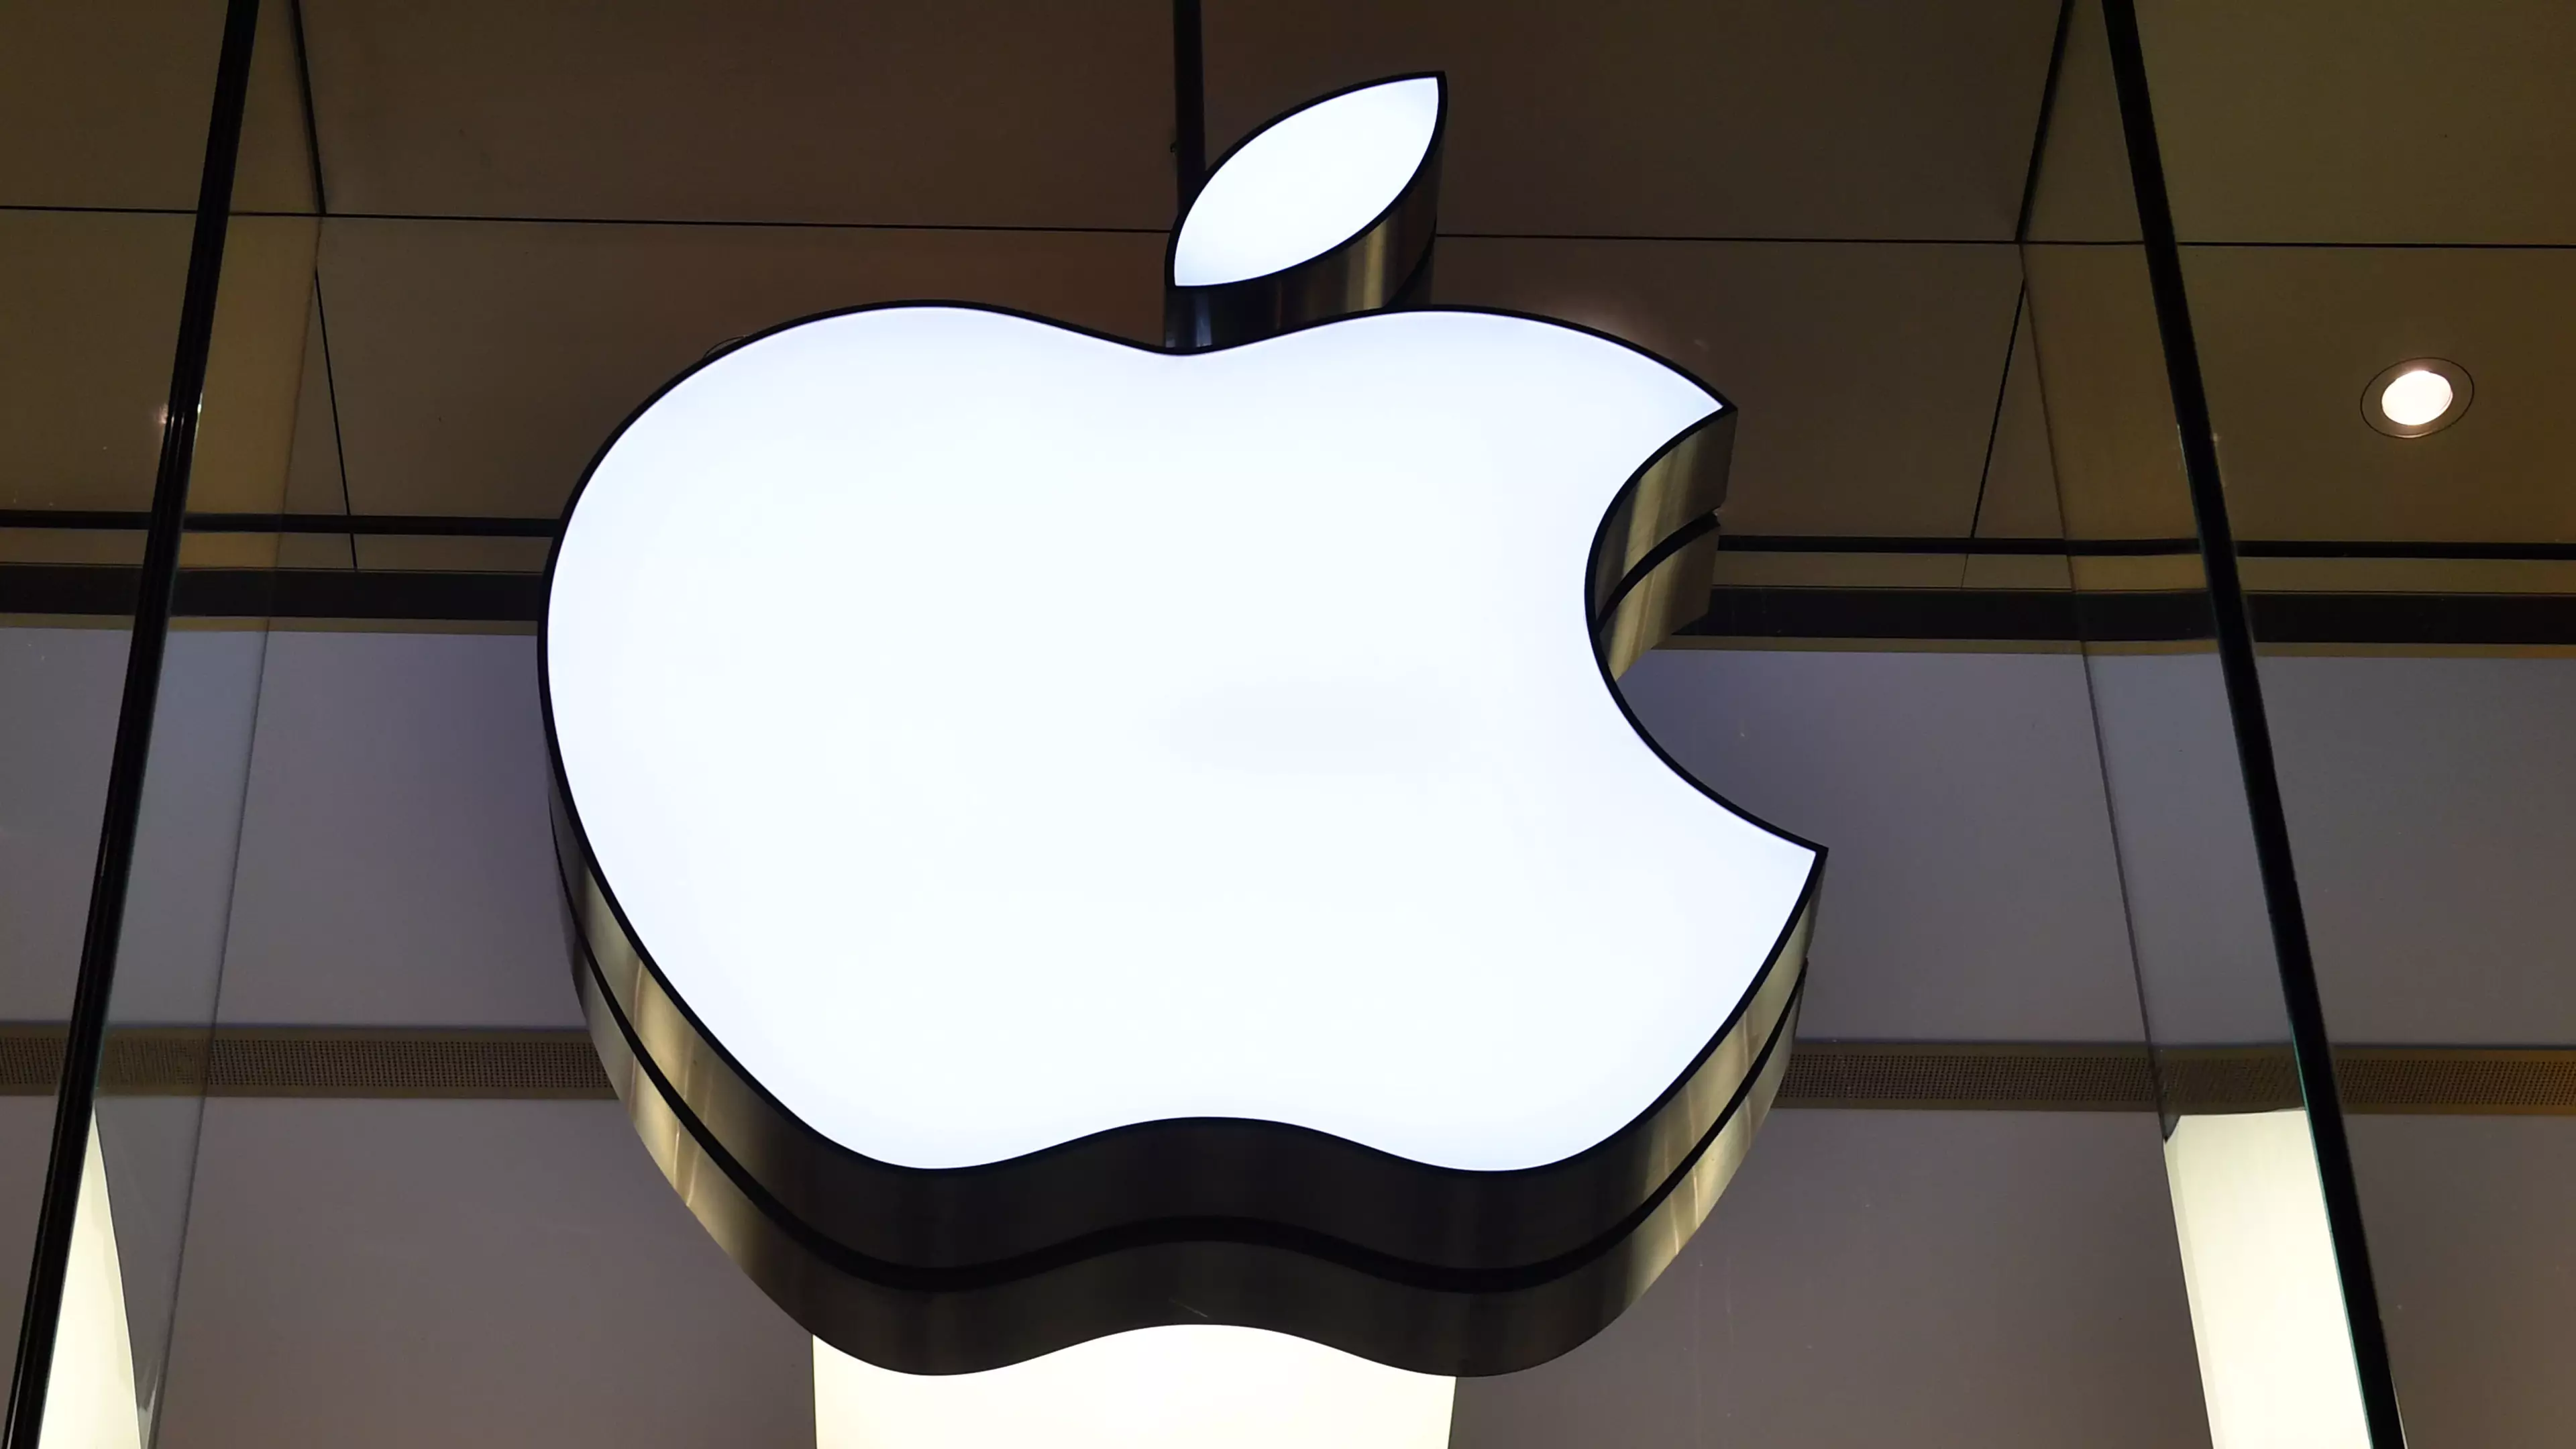 All But One Of Australia's Apple Stores To Reopen On Thursday